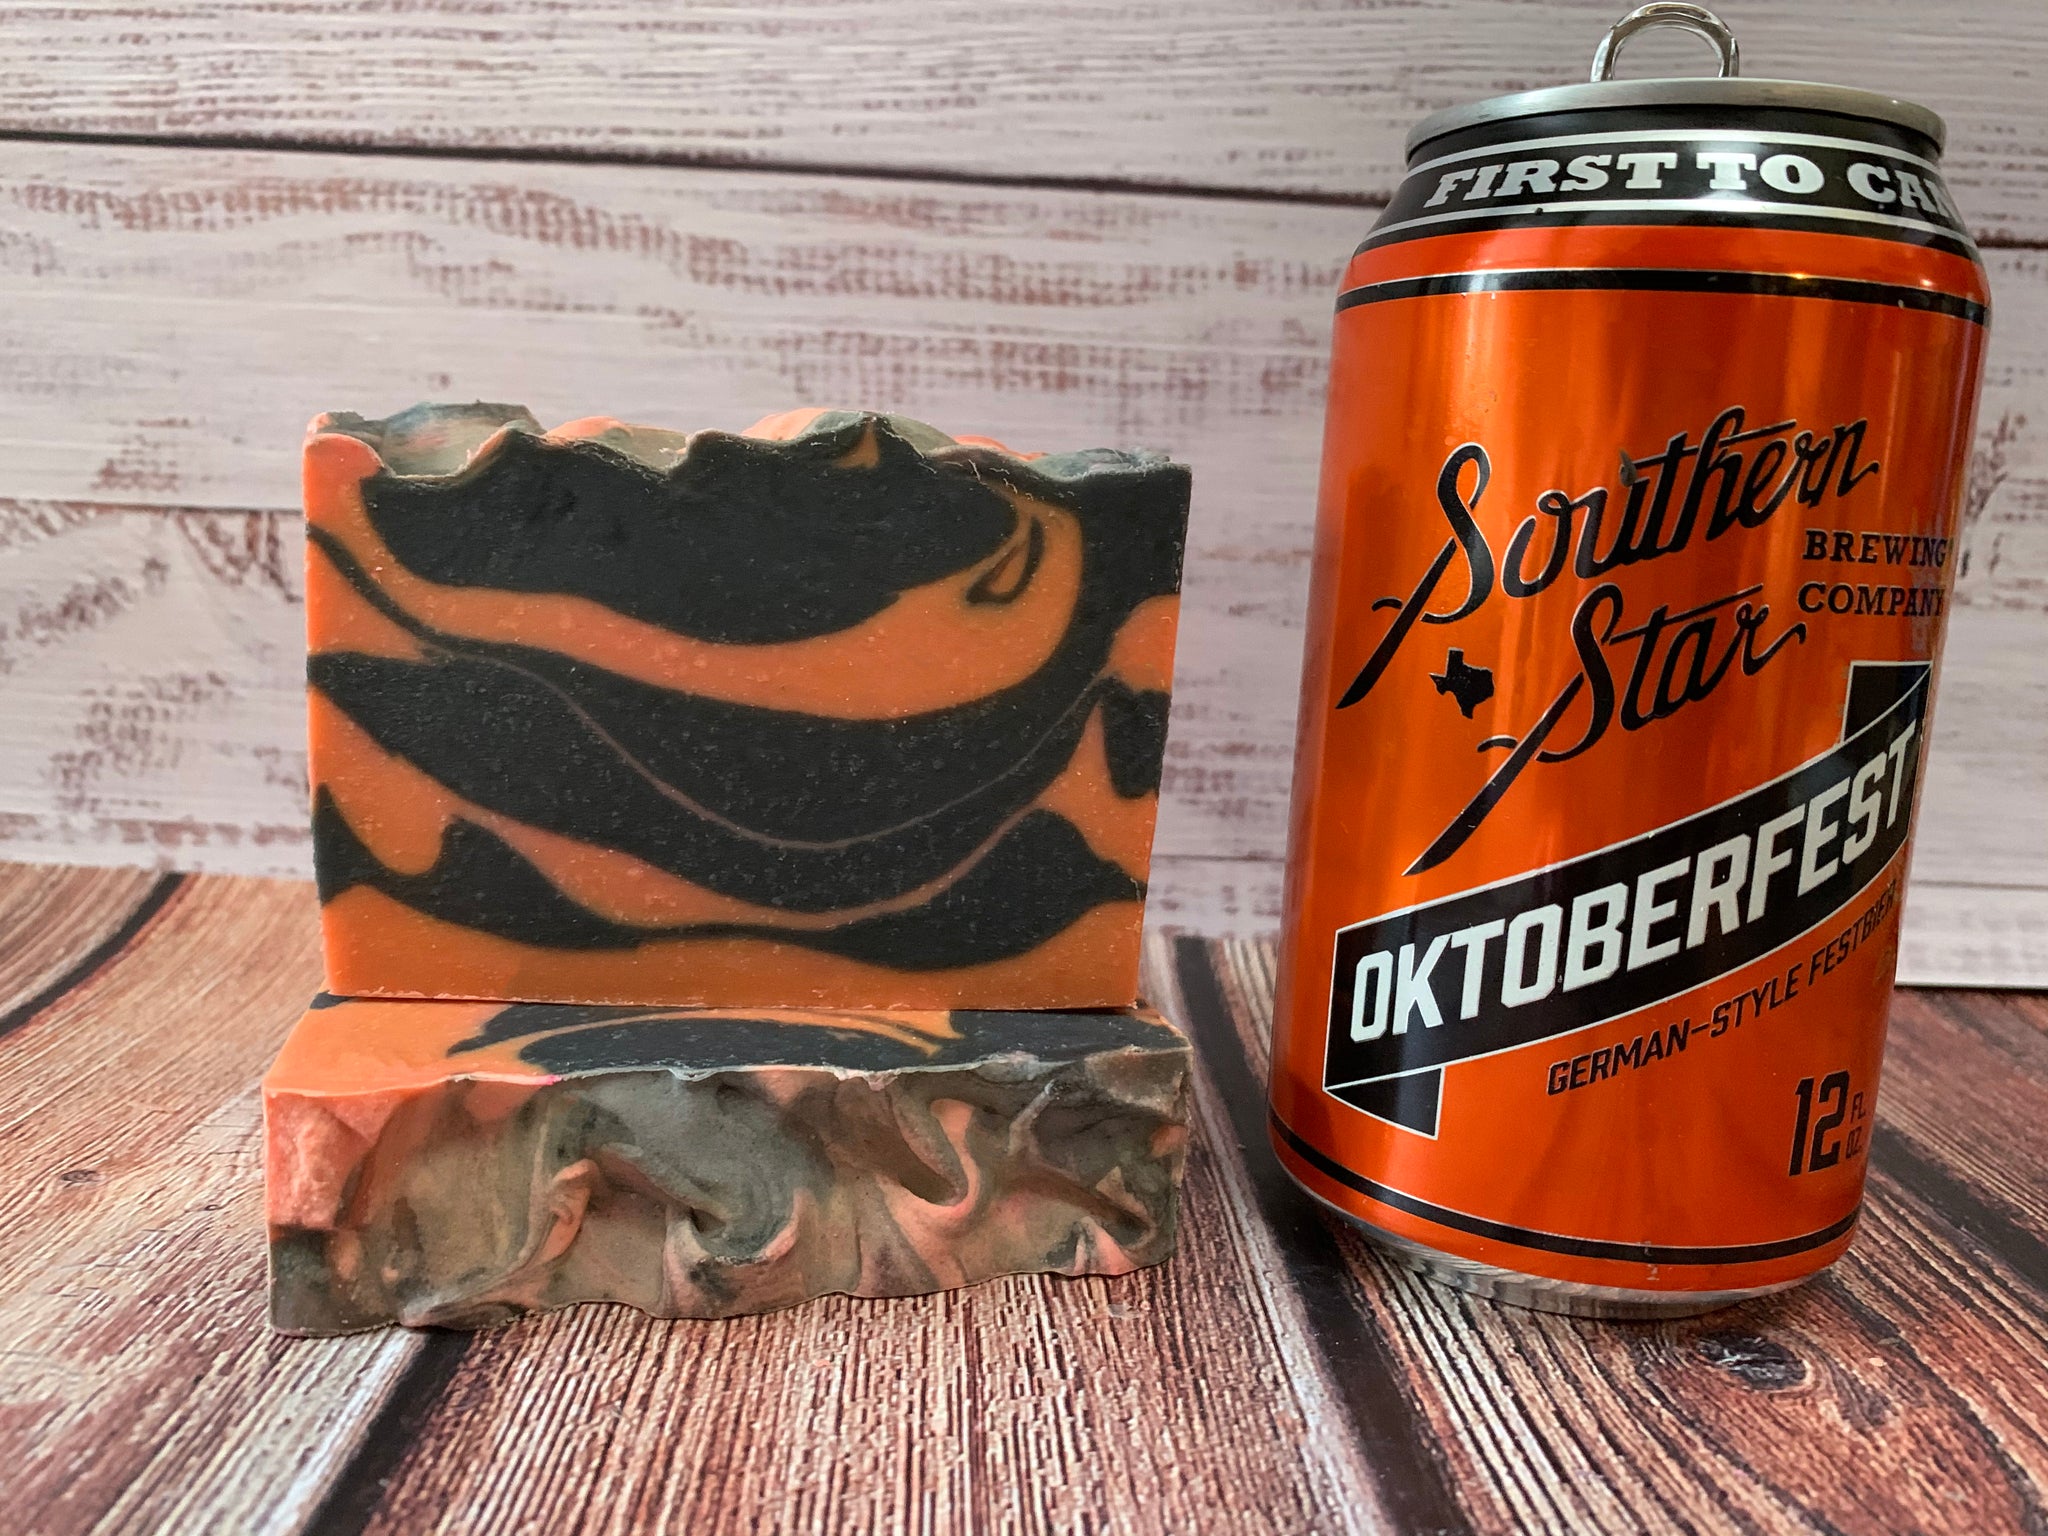 orange and black craft beer soap handmade in texas with Oktoberfest German style festbier from southern star brewing company conroe texas craft brewery spunkndisorderly pumpkin soap 